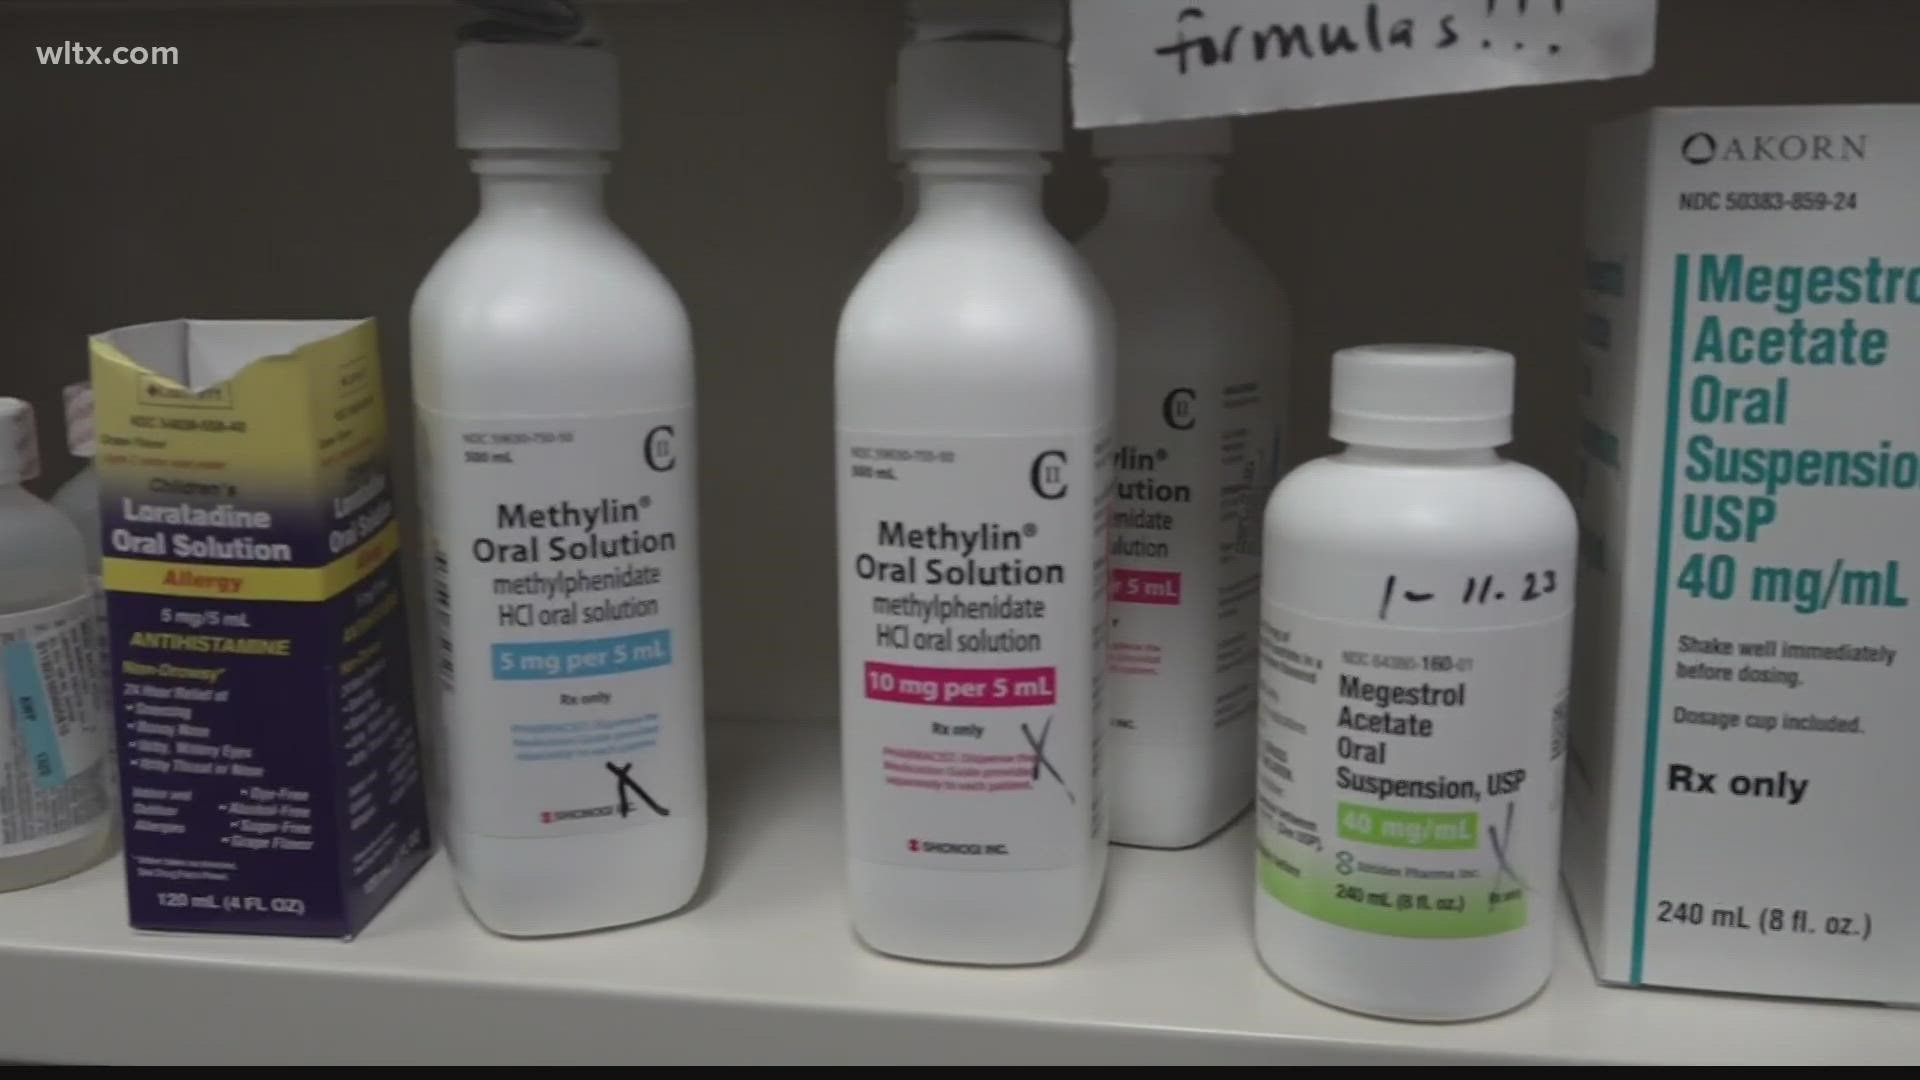 Pharmacists are seeing shortages in amoxicillin and some Type 2 diabetes drugs.